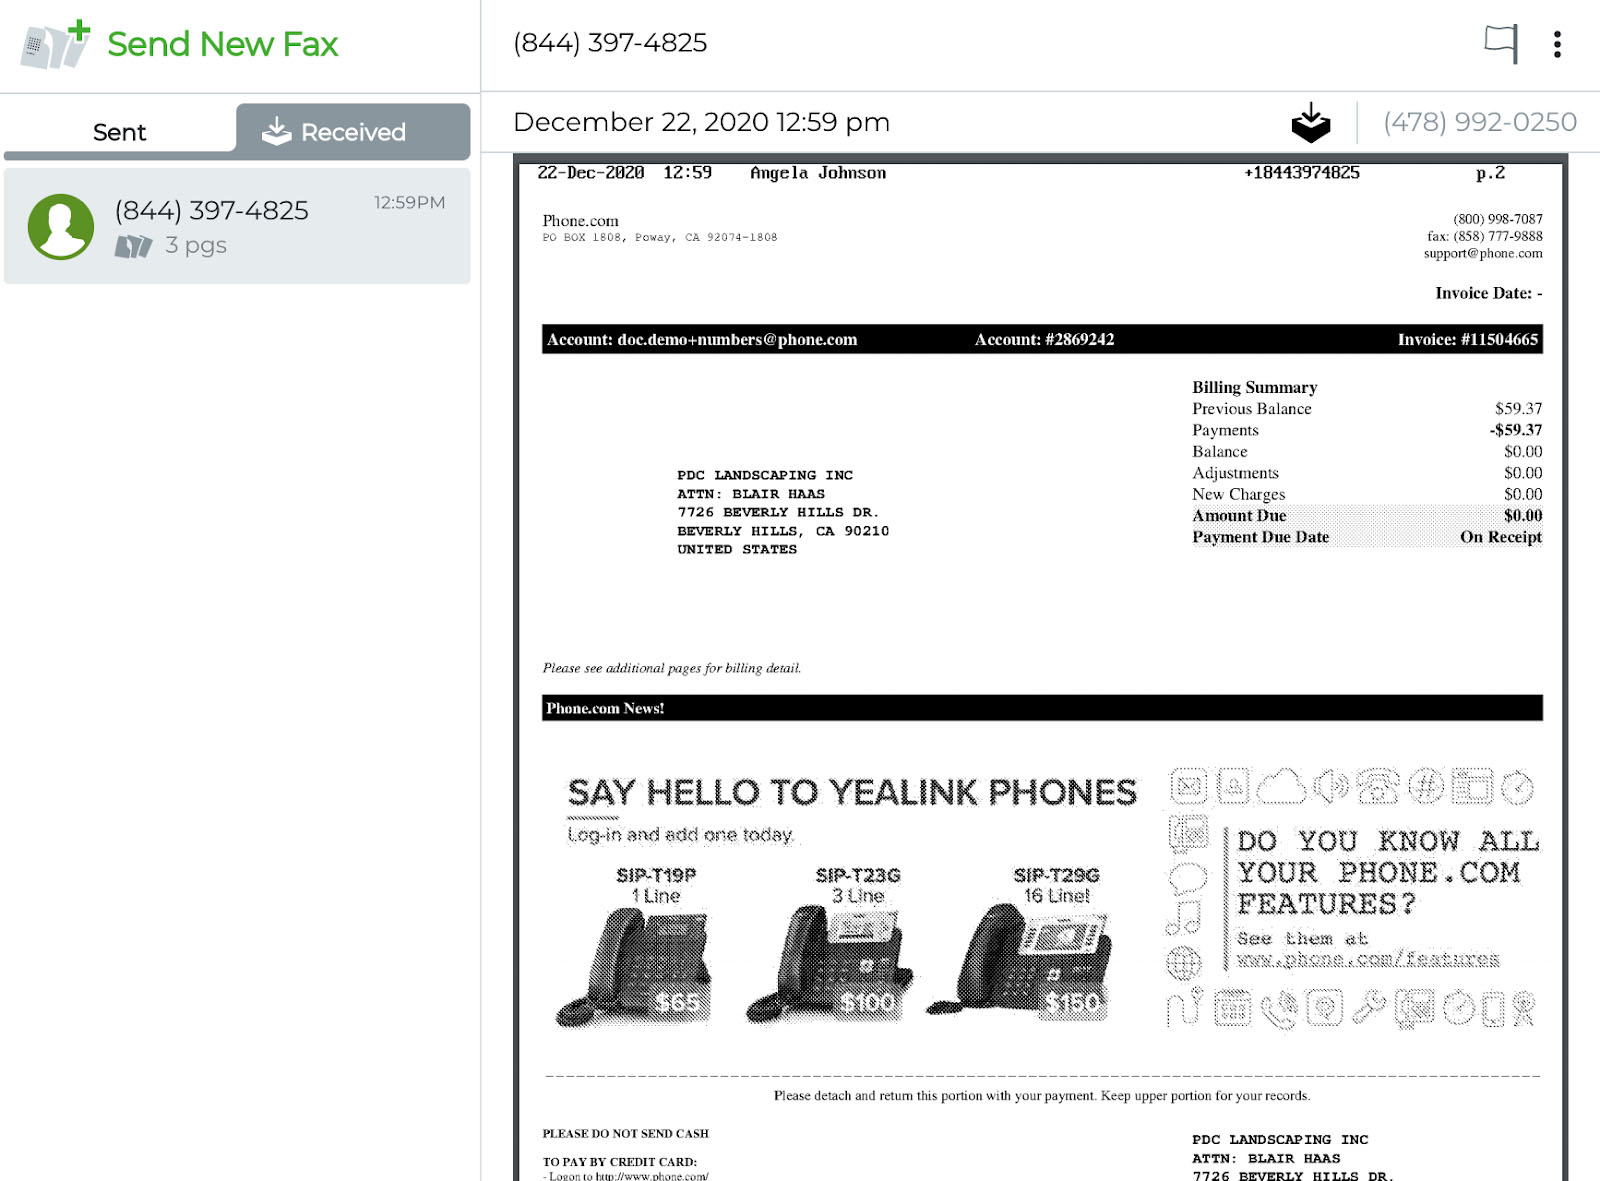 Phone.com interface showing the virtual fax feature, which has the "Sent" and "Received" tabs on the left and a preview of the document on the center-right of the screen.